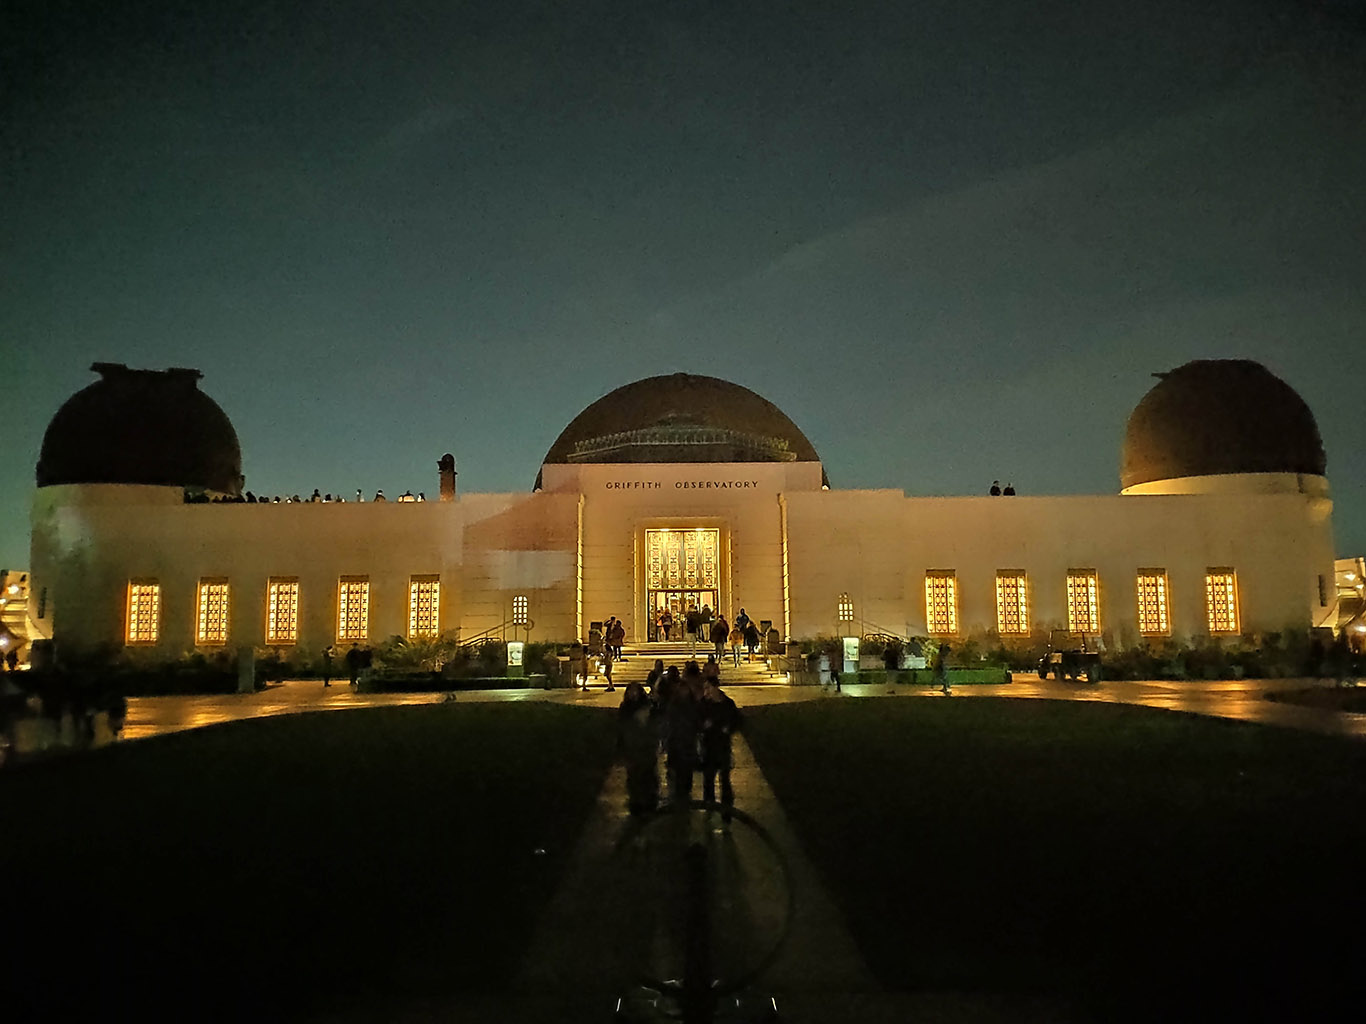 20191227 Griffith Observatory